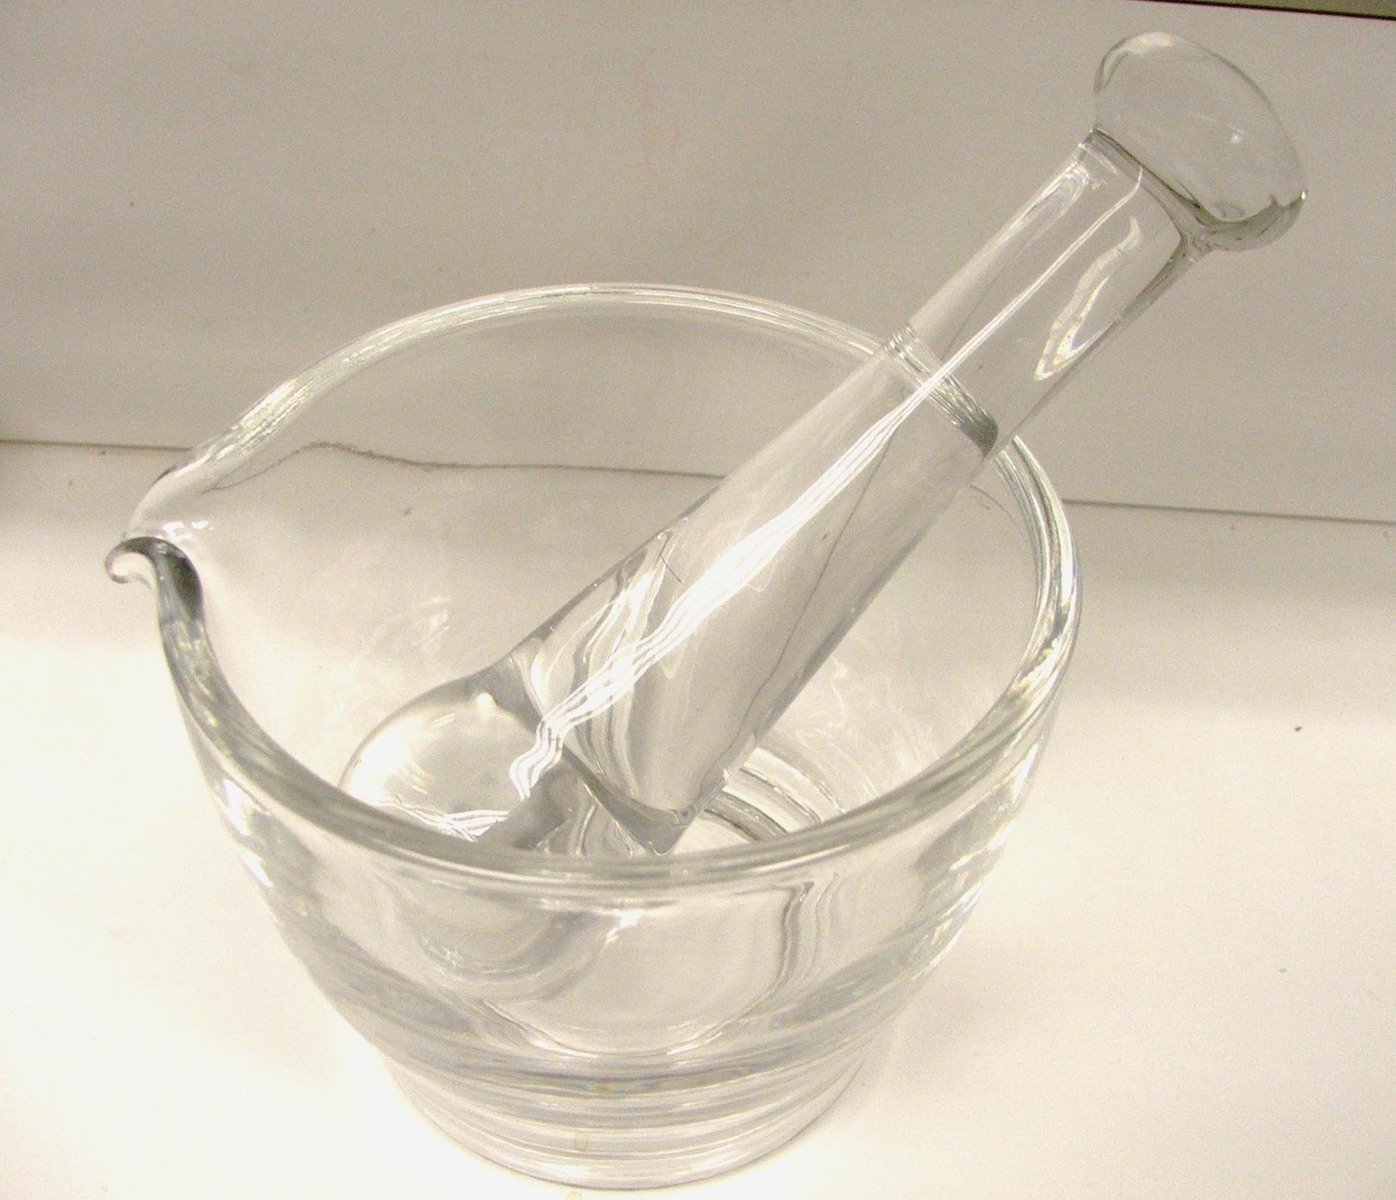 a glass filled with a clear liquid next to a bottle